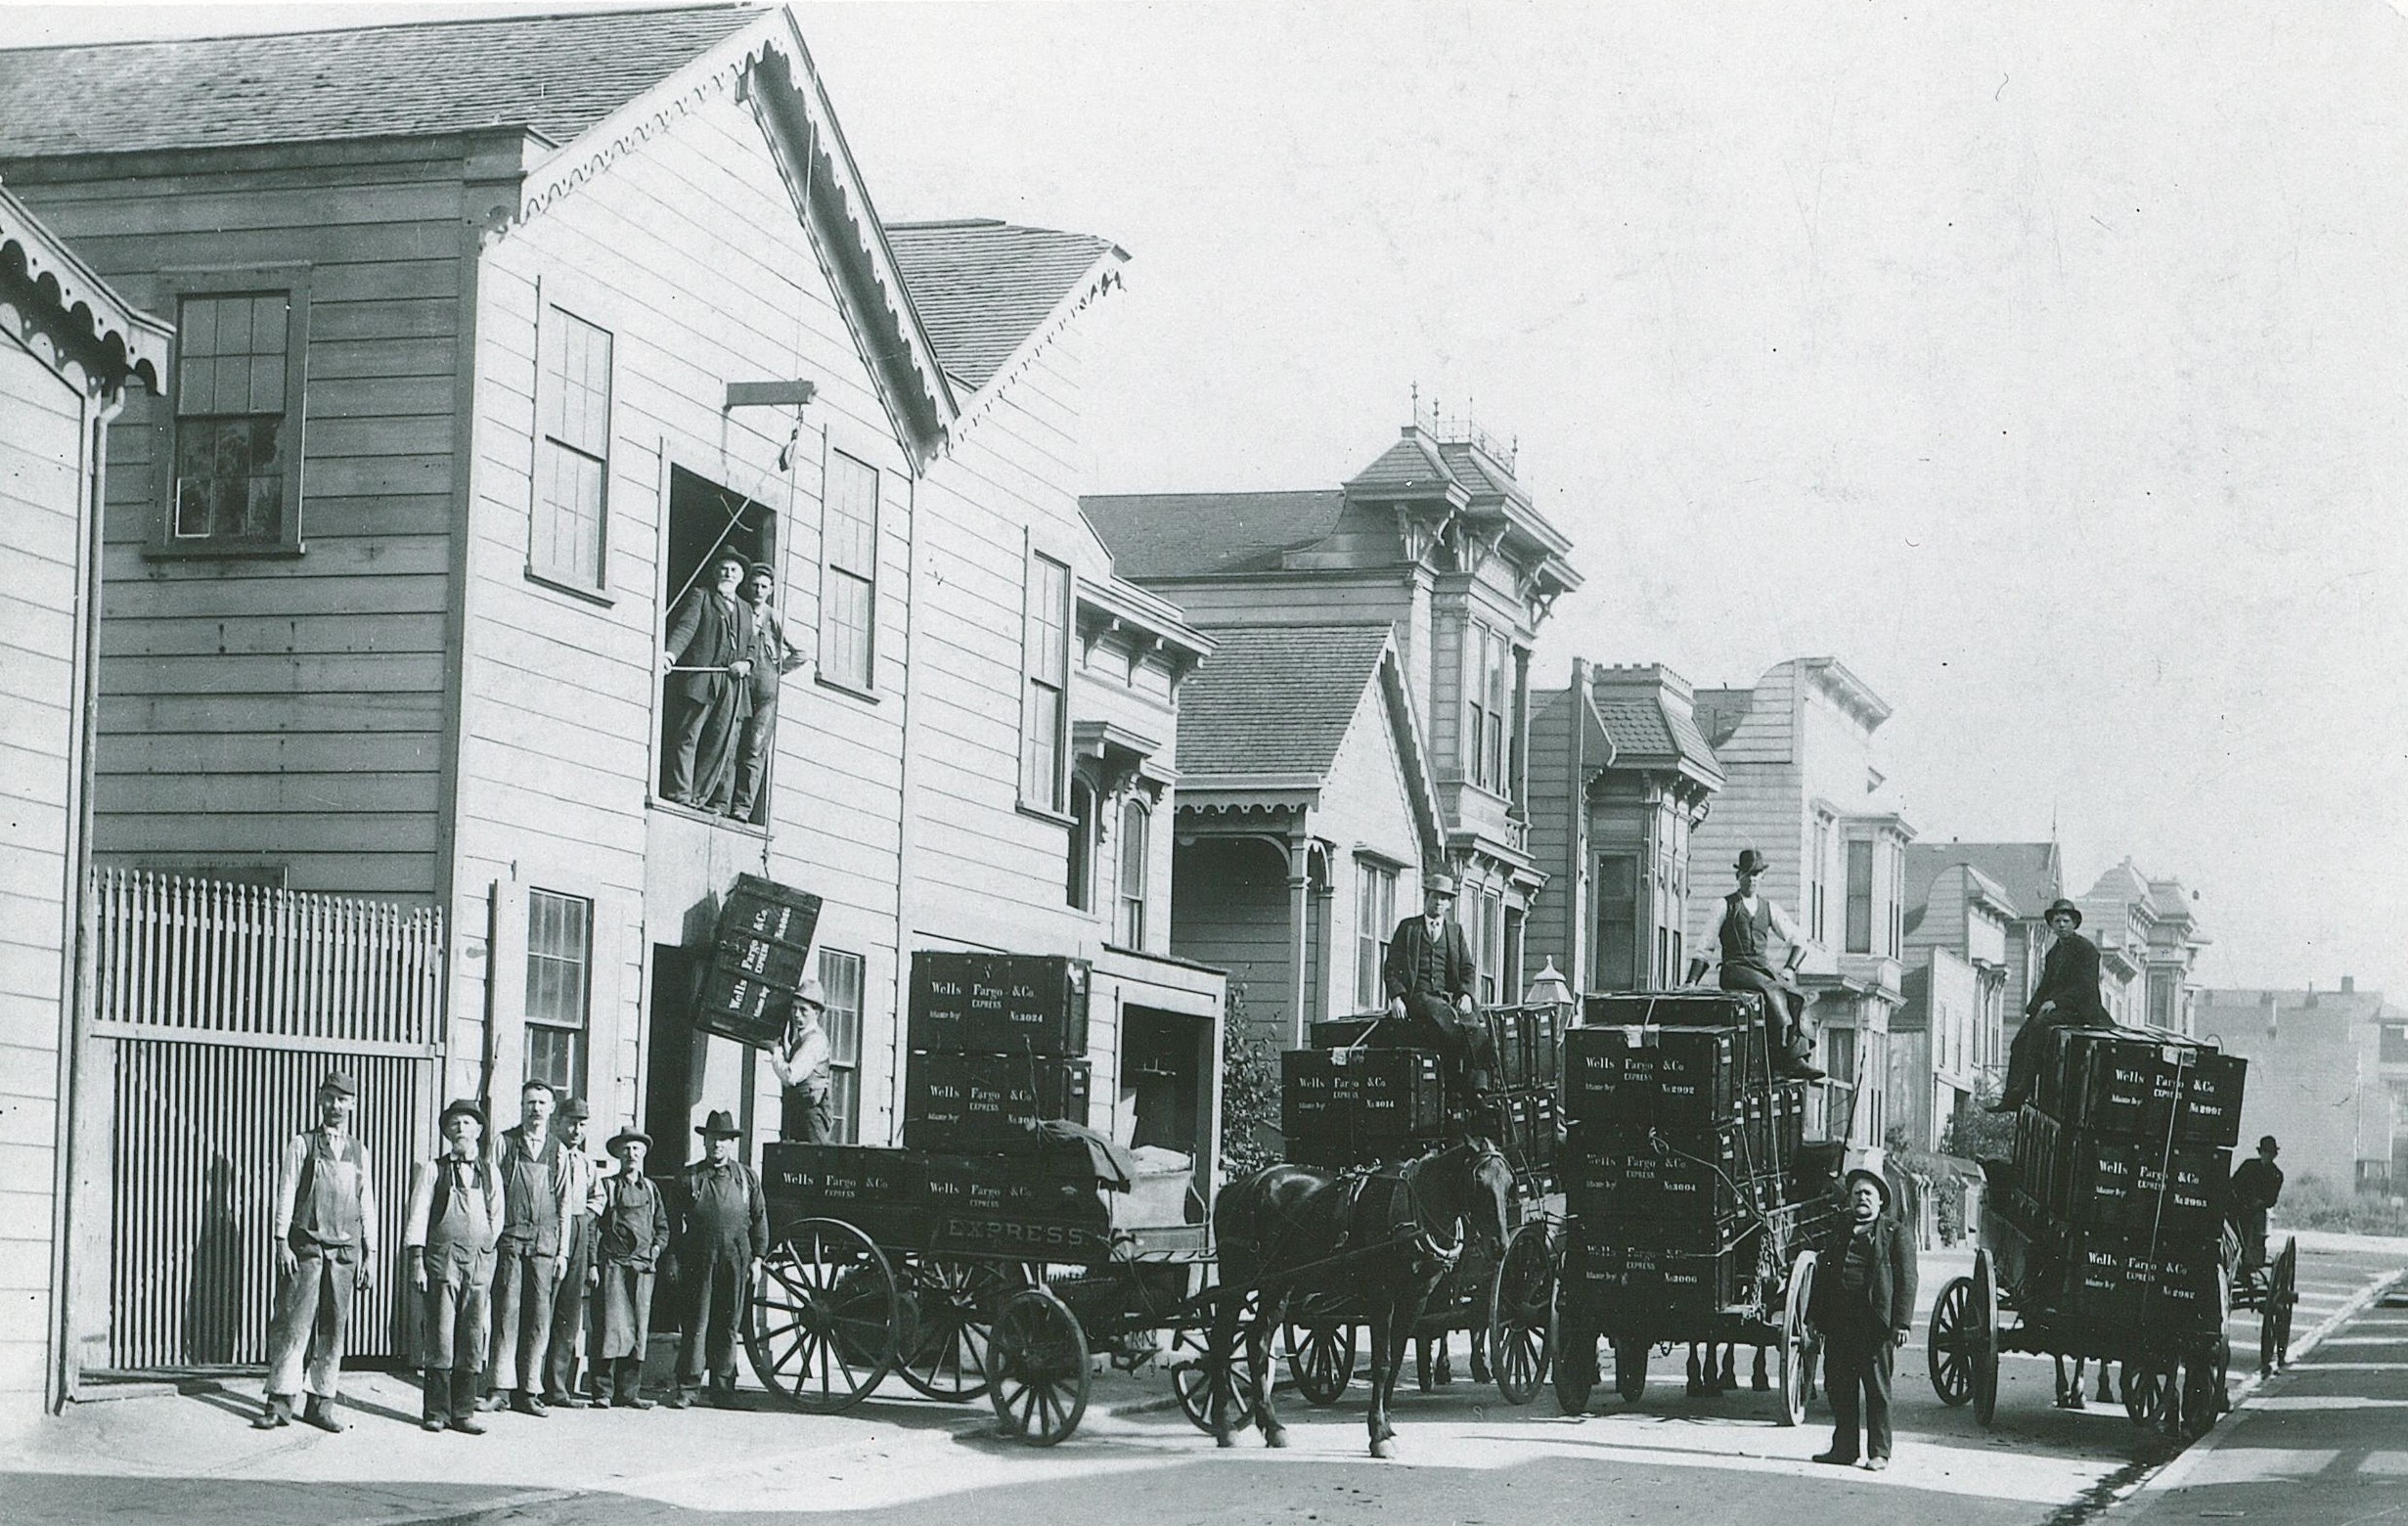 Four Wells Fargo wagons fill the street outside of a carpentry workshop building. Three are loaded with a dozen large wood trunks each. Workmen lower a trunk by rope onto a fourth wagon. Workers and wagon drivers stand on and around the wagons.